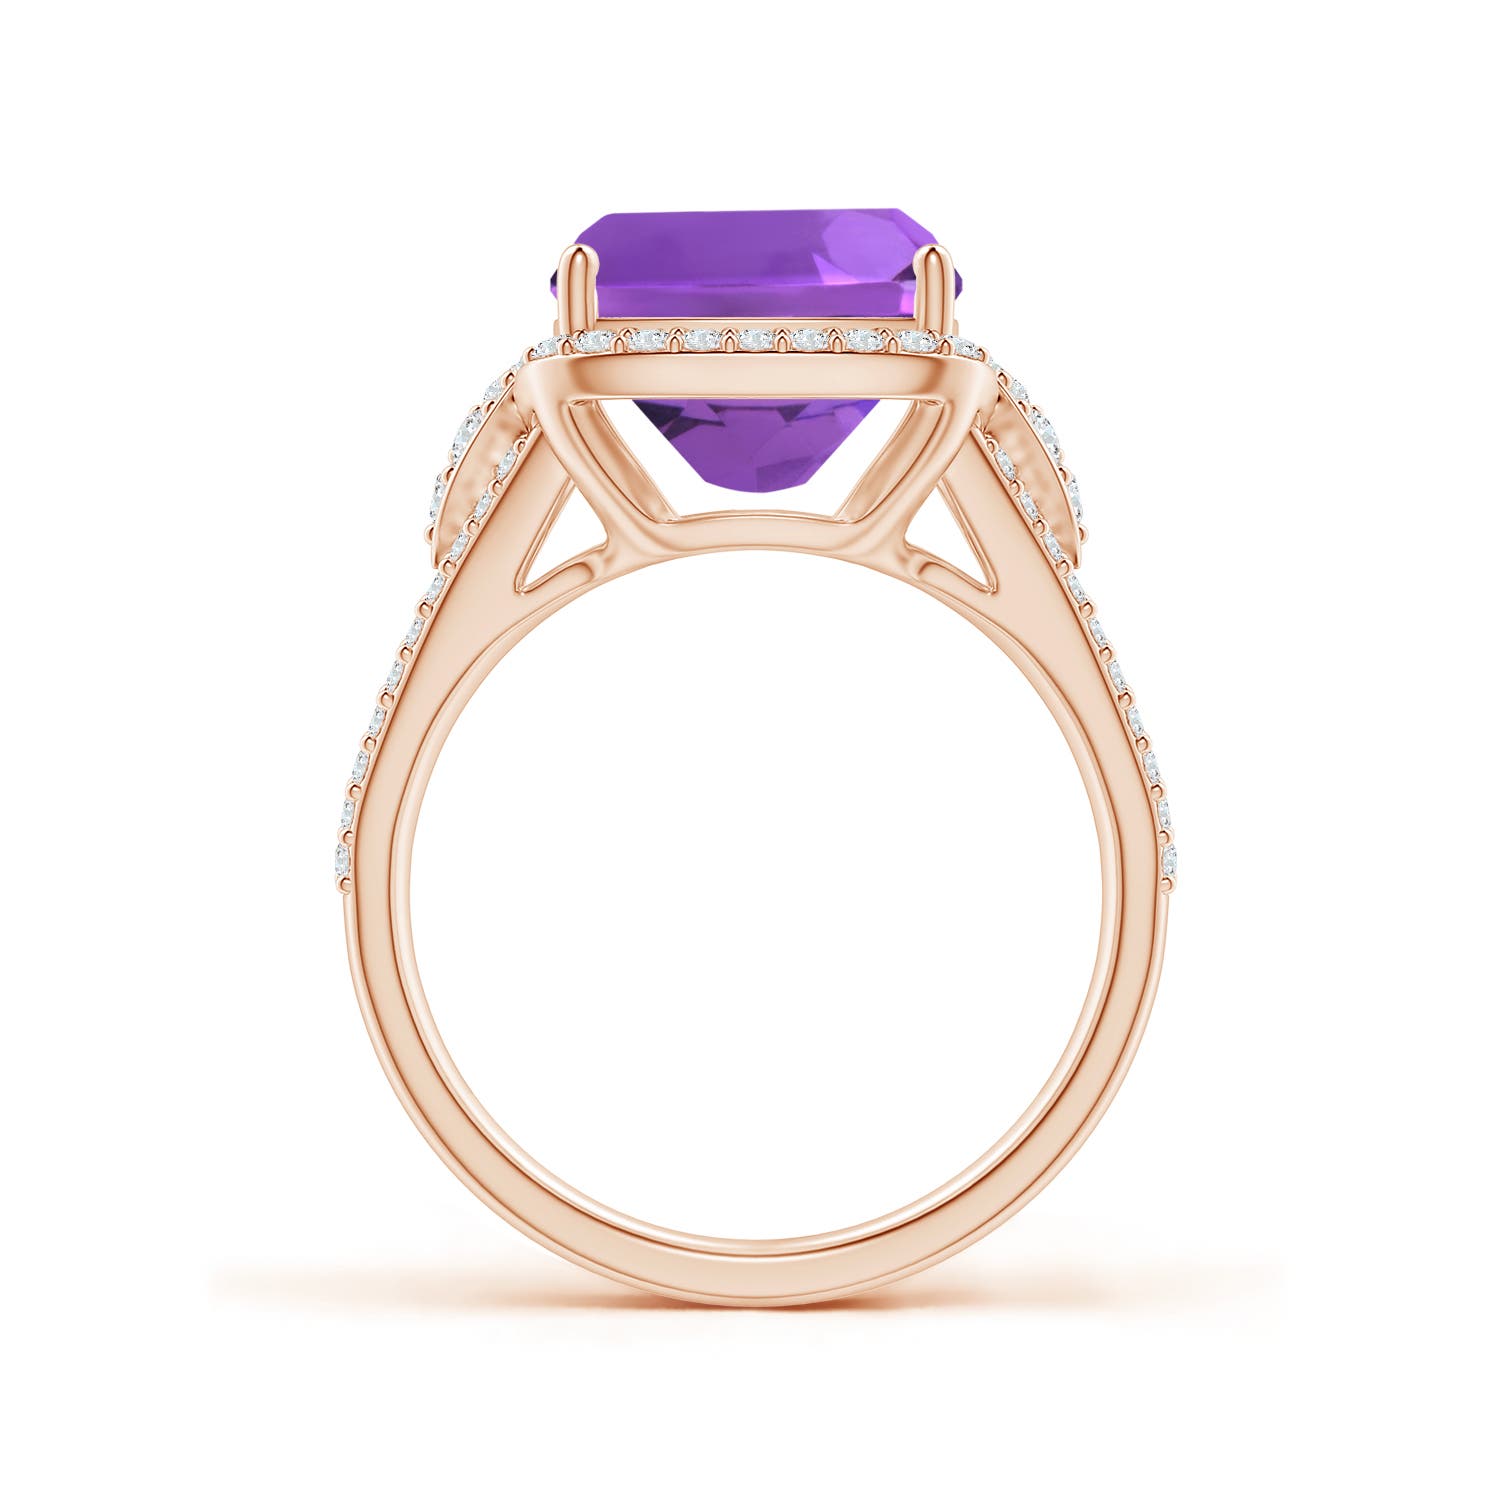 AAA - Amethyst / 5.06 CT / 14 KT Rose Gold